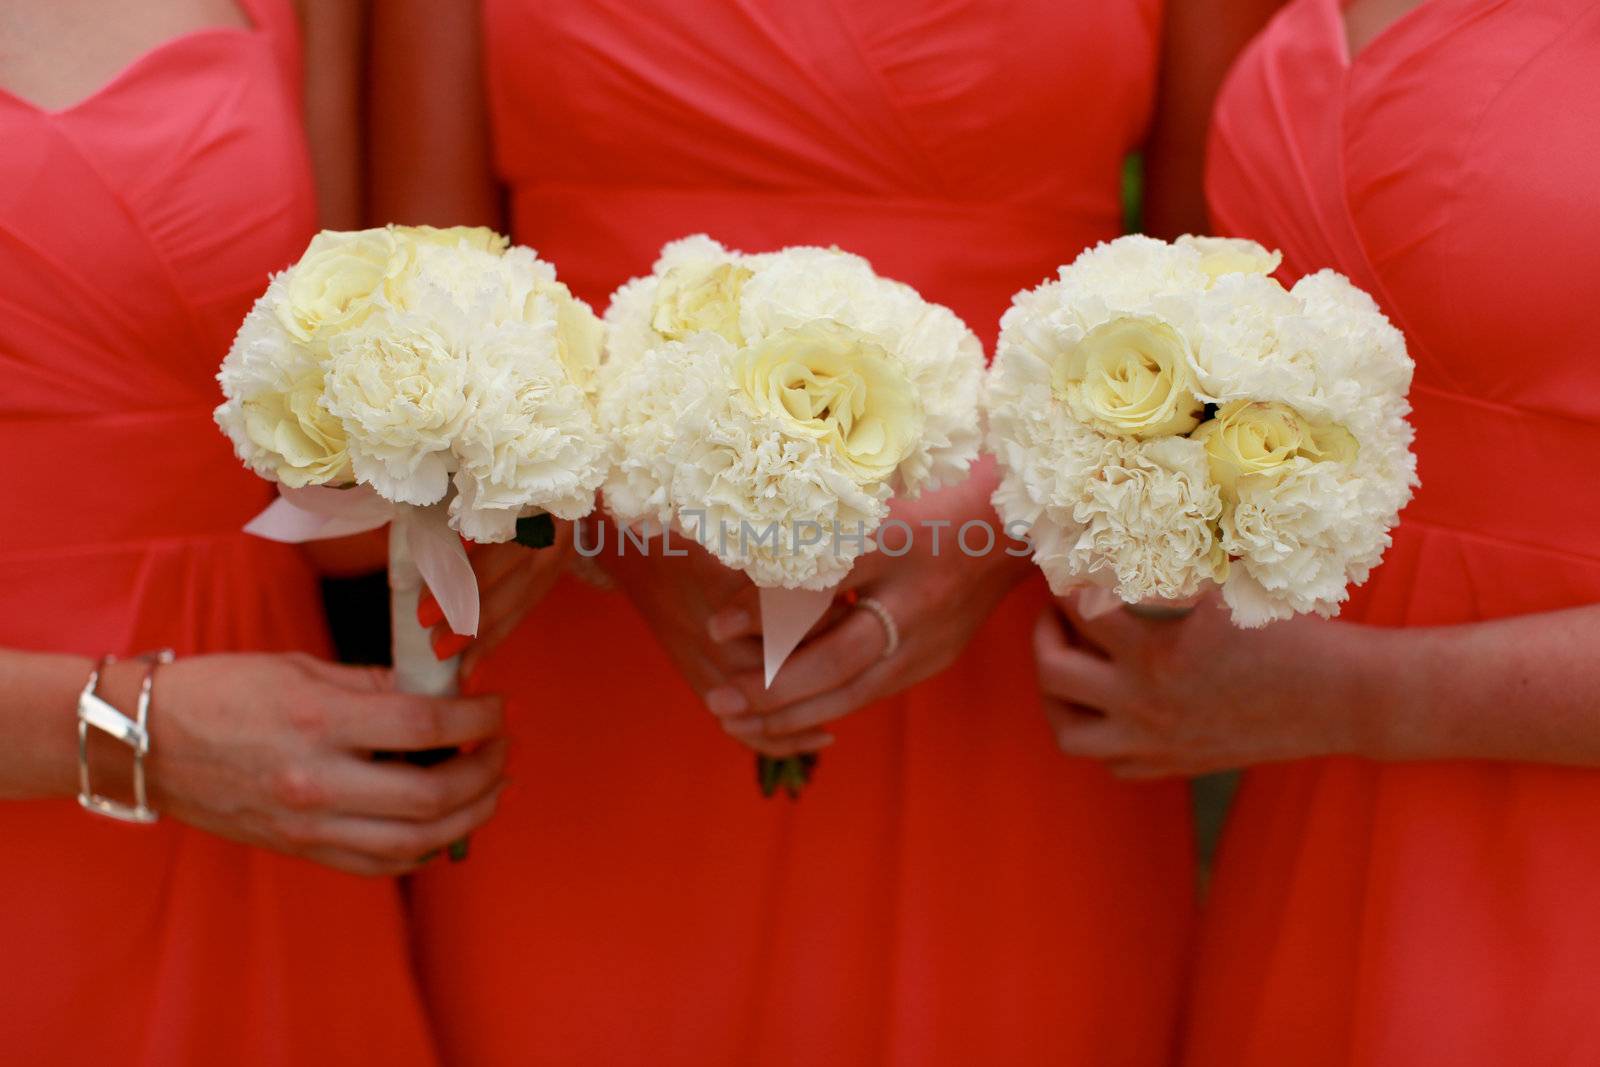 Close-up of bridesmaids holding their wedding bouquets.